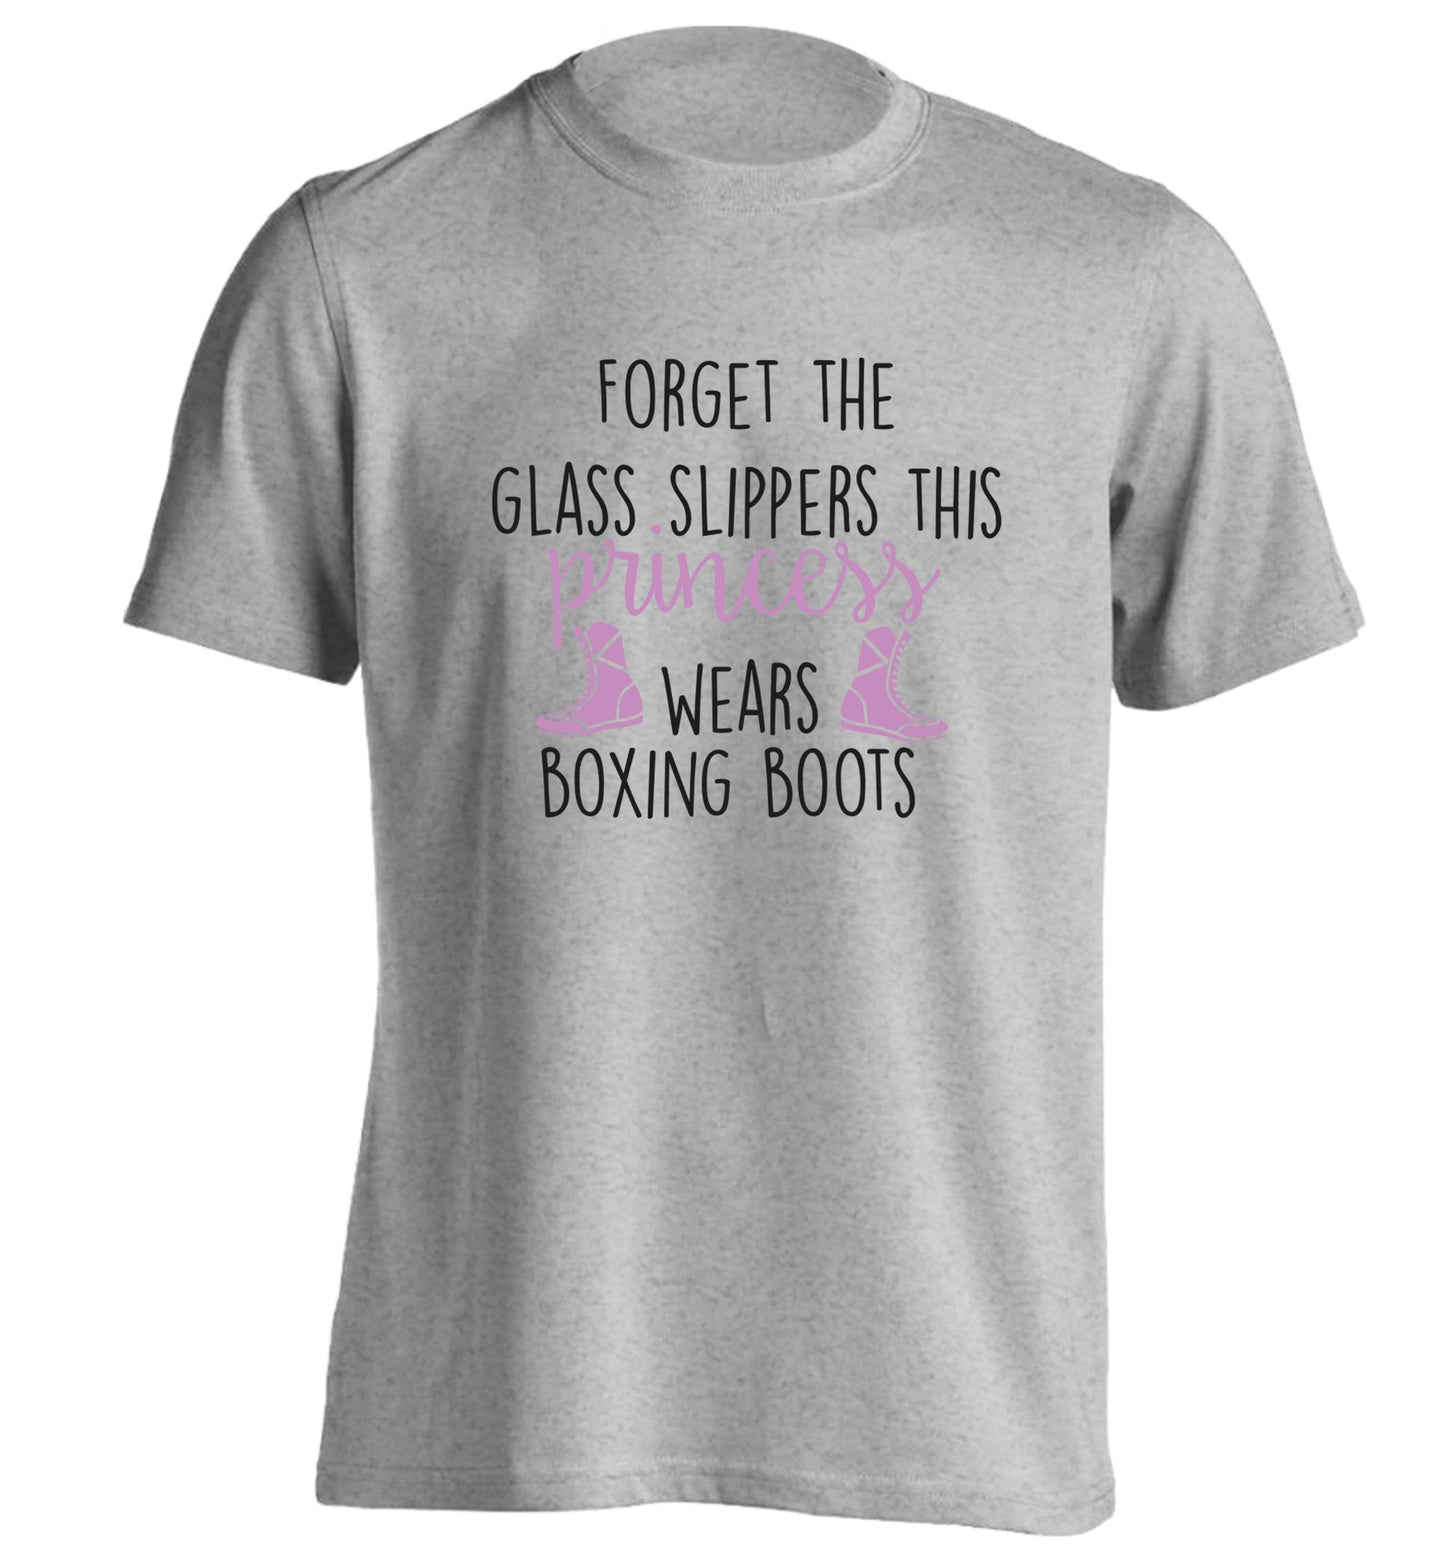 Forget the glass slippers this princess wears boxing boots adults unisex grey Tshirt 2XL